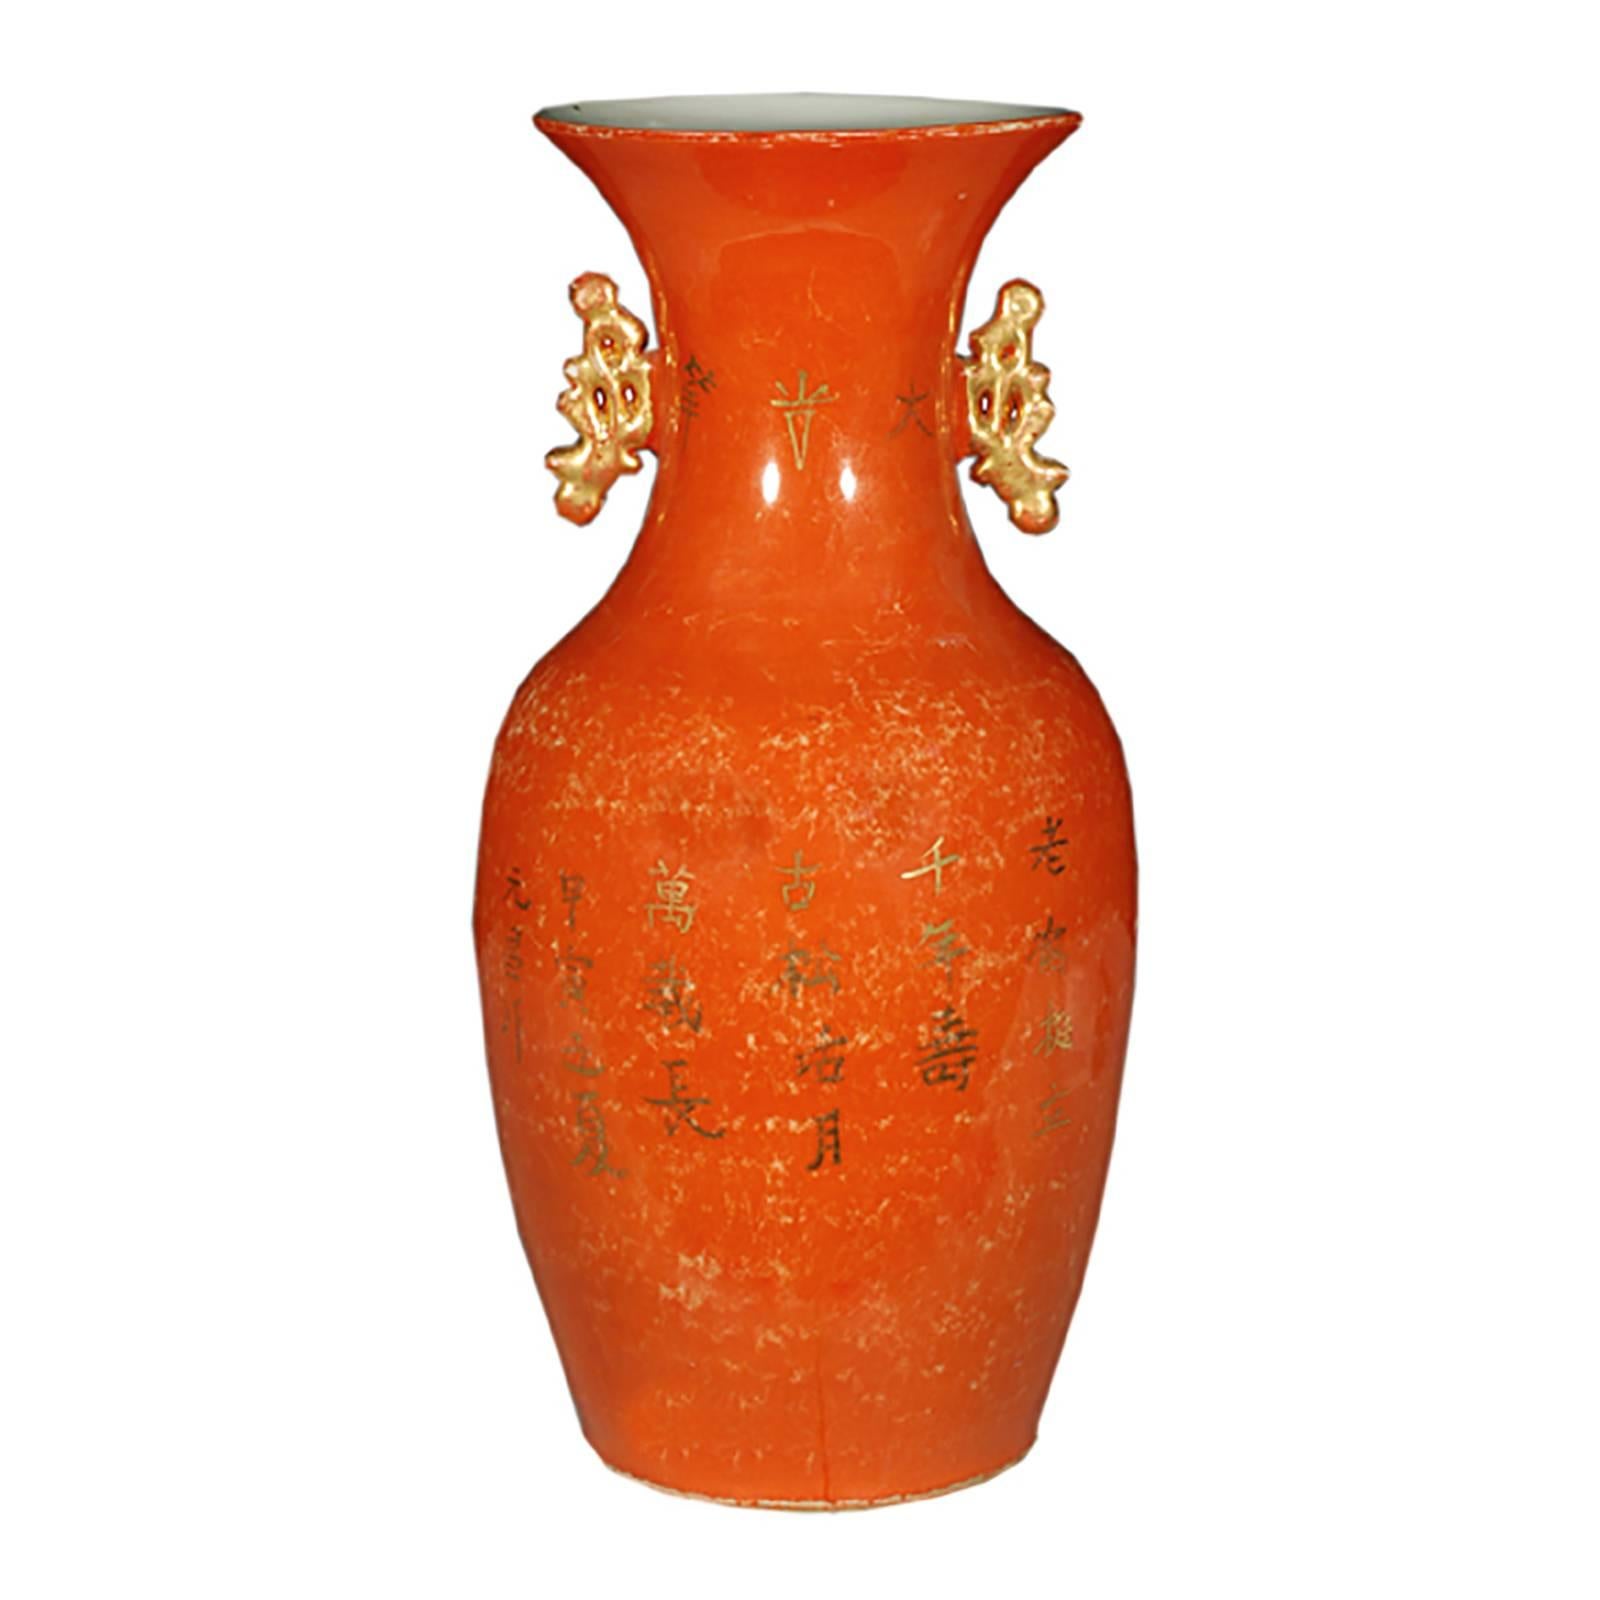 The impressive gilt decoration on this vintage vase has mellowed to a timeless elegance over the past century. The graceful and auspicious hand-painted cranes amidst pine represent longevity. When it was made in the 1920s, the world was in the